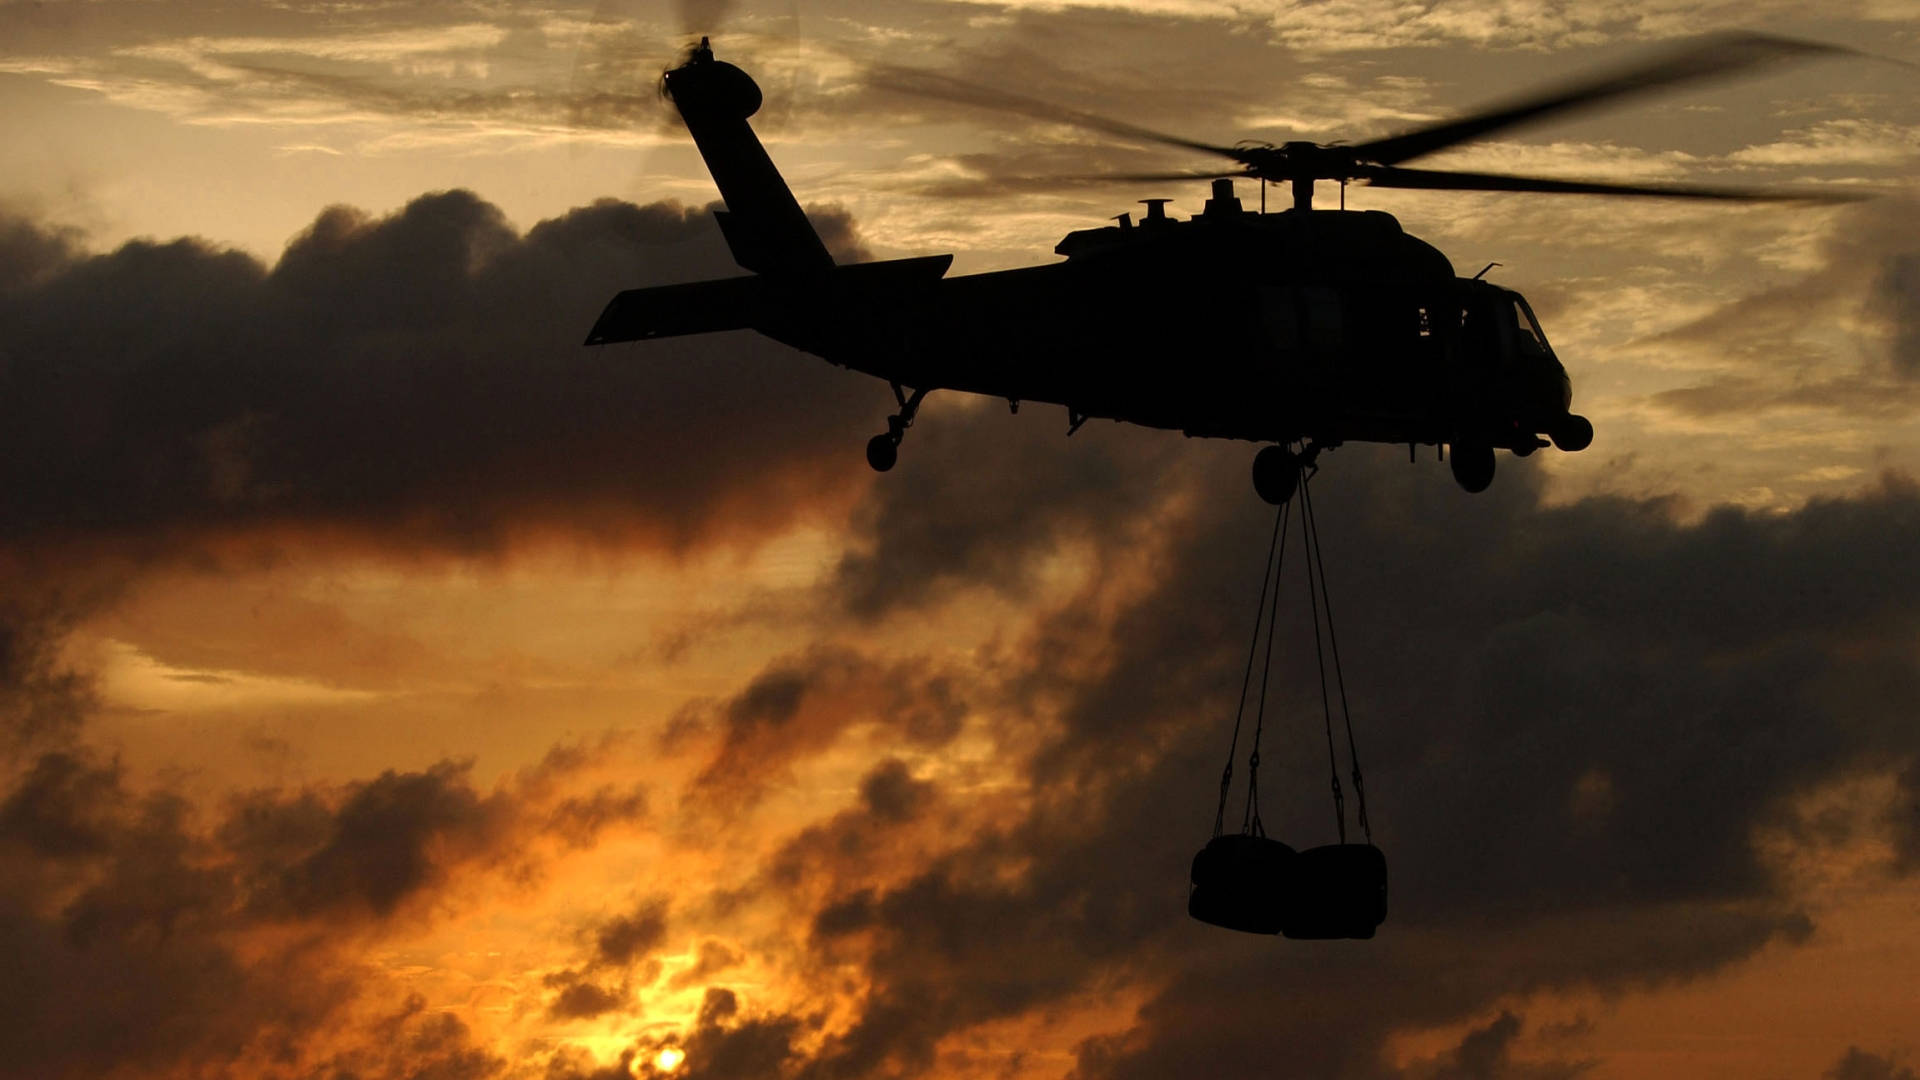 Black Hawk Helicopter Carrying Supplies Wallpaper